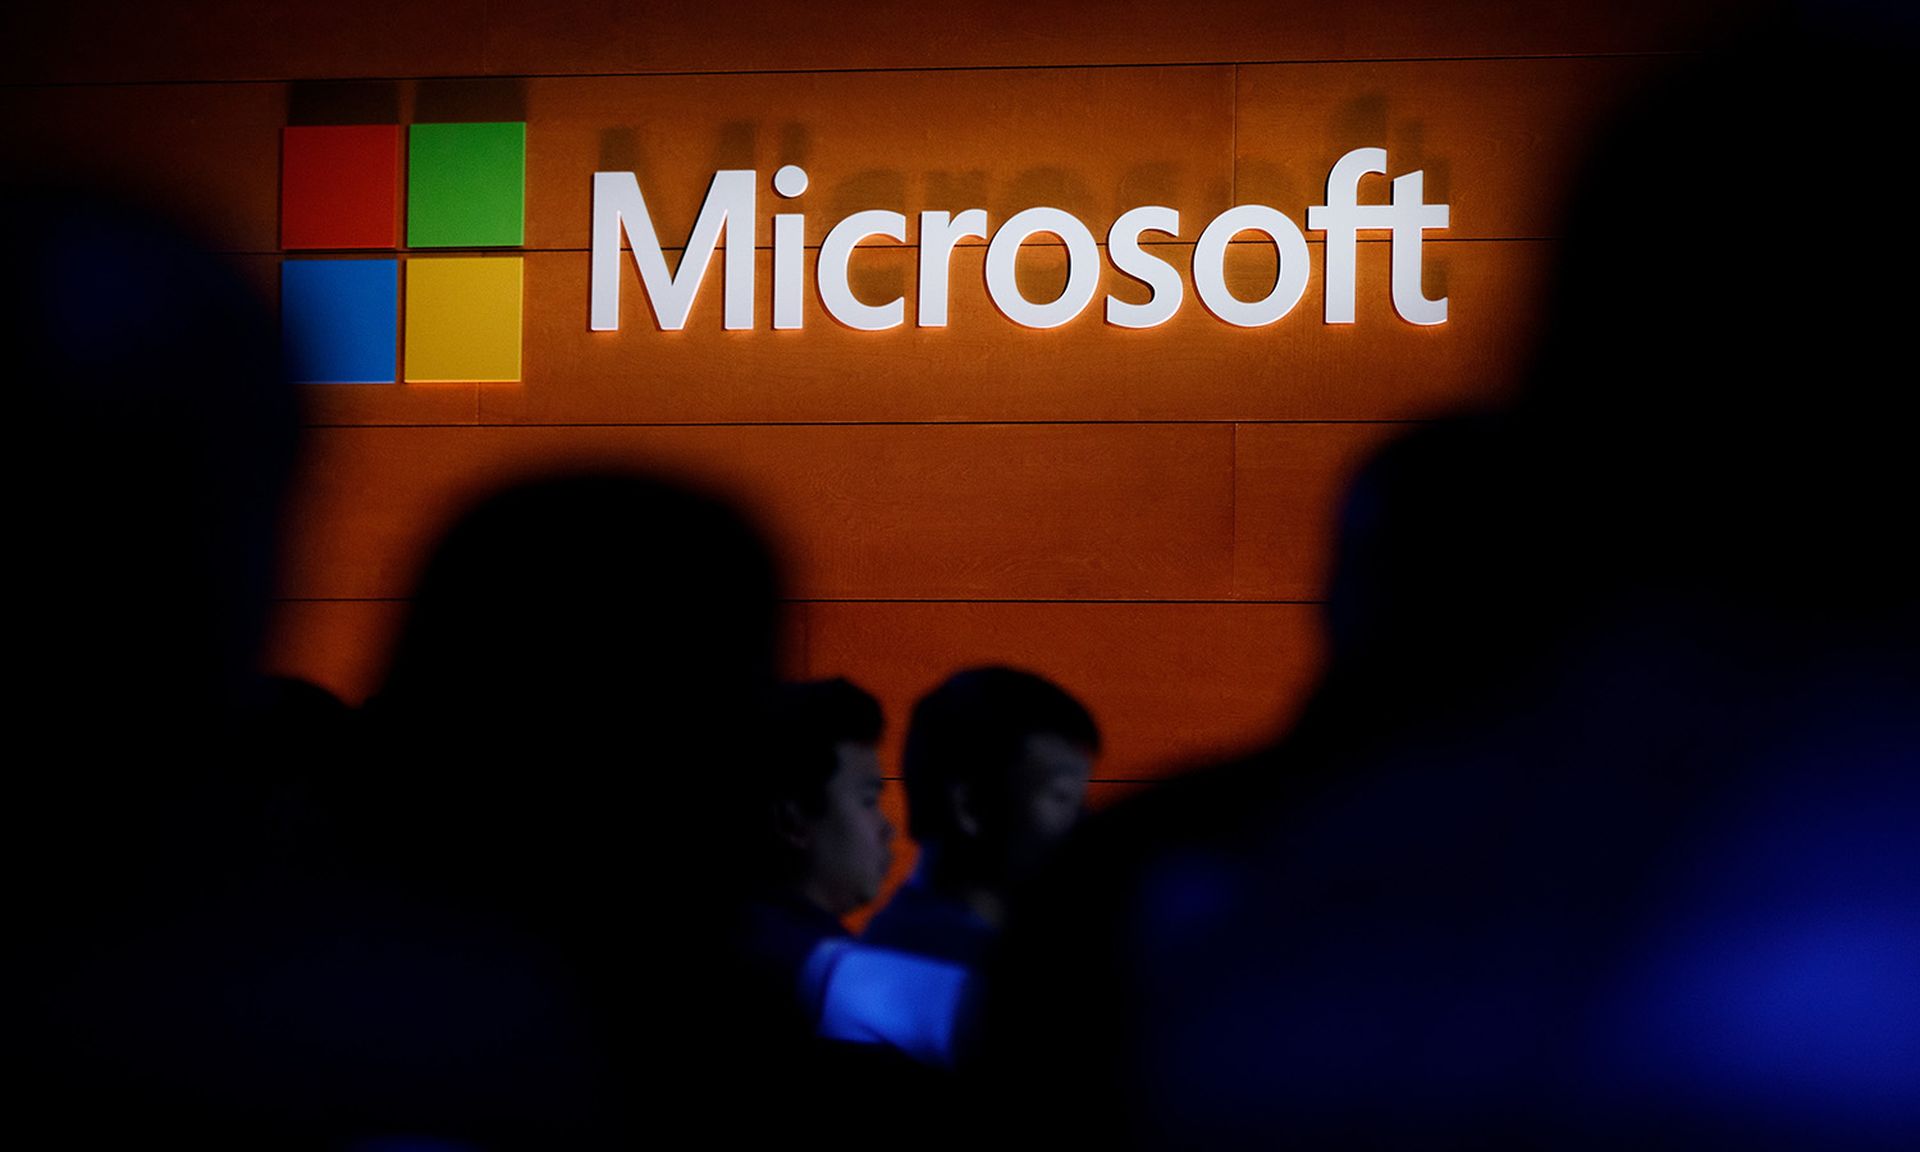 The Microsoft logo is illuminated on a wall during a May 2, 2017, launch event in New York City. (Photo by Drew Angerer/Getty Images)